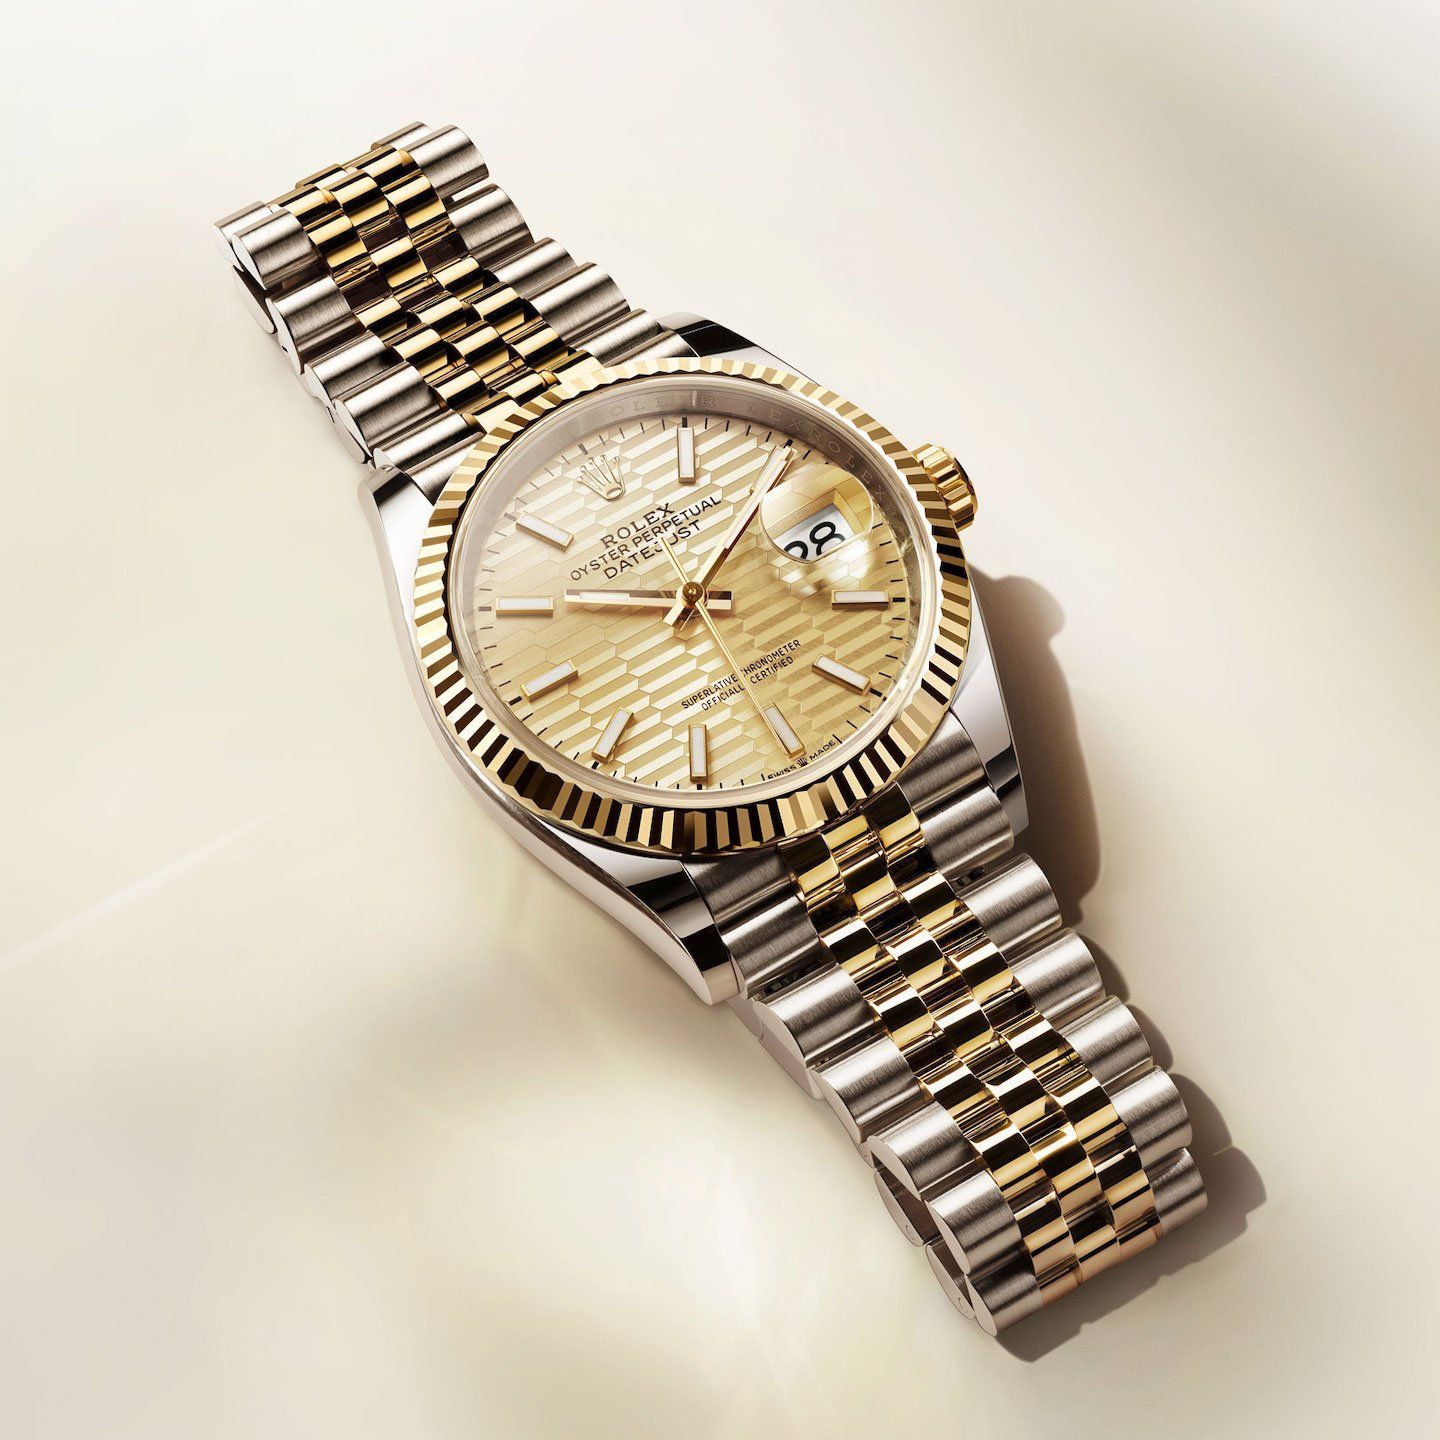 family-page-datejust-roller-02-m126233-0039_2107jva_002